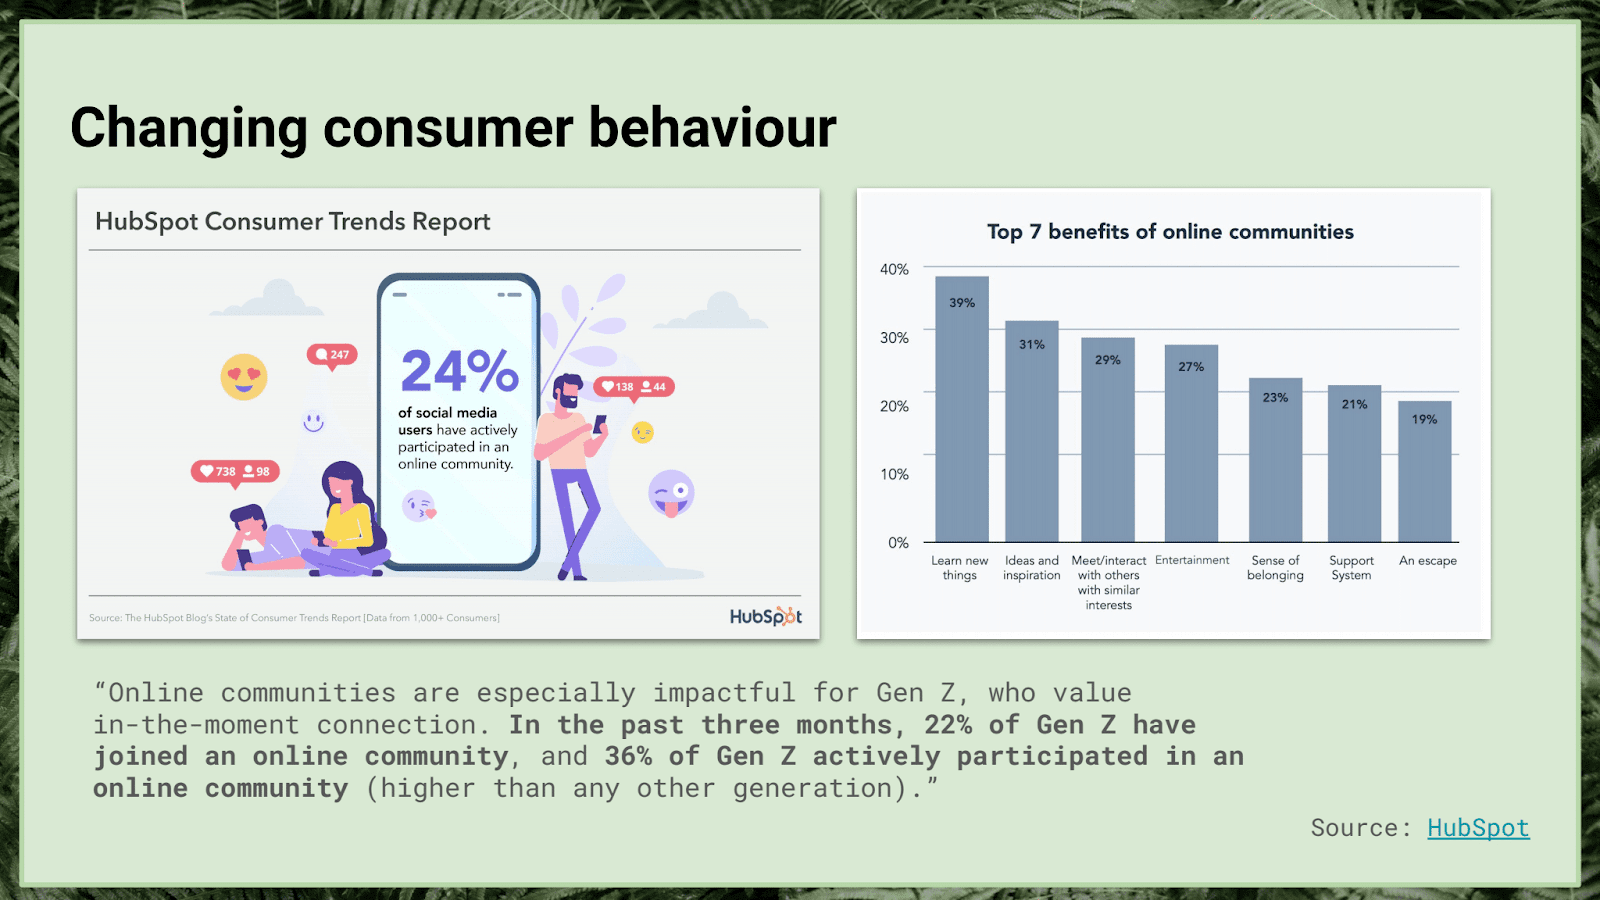 Changing consumer behaviour. 24% of social media users have actively participated in an online community. A bar graph lists the top 7 benefits of online communities, with "Learn new things" at 39%, "Ideas and inspiration" at 31%, and other benefits following. 22% of Gen Z joined an online community in the past three months, and 36% actively participated, higher than other generations. Source: HubSpot.